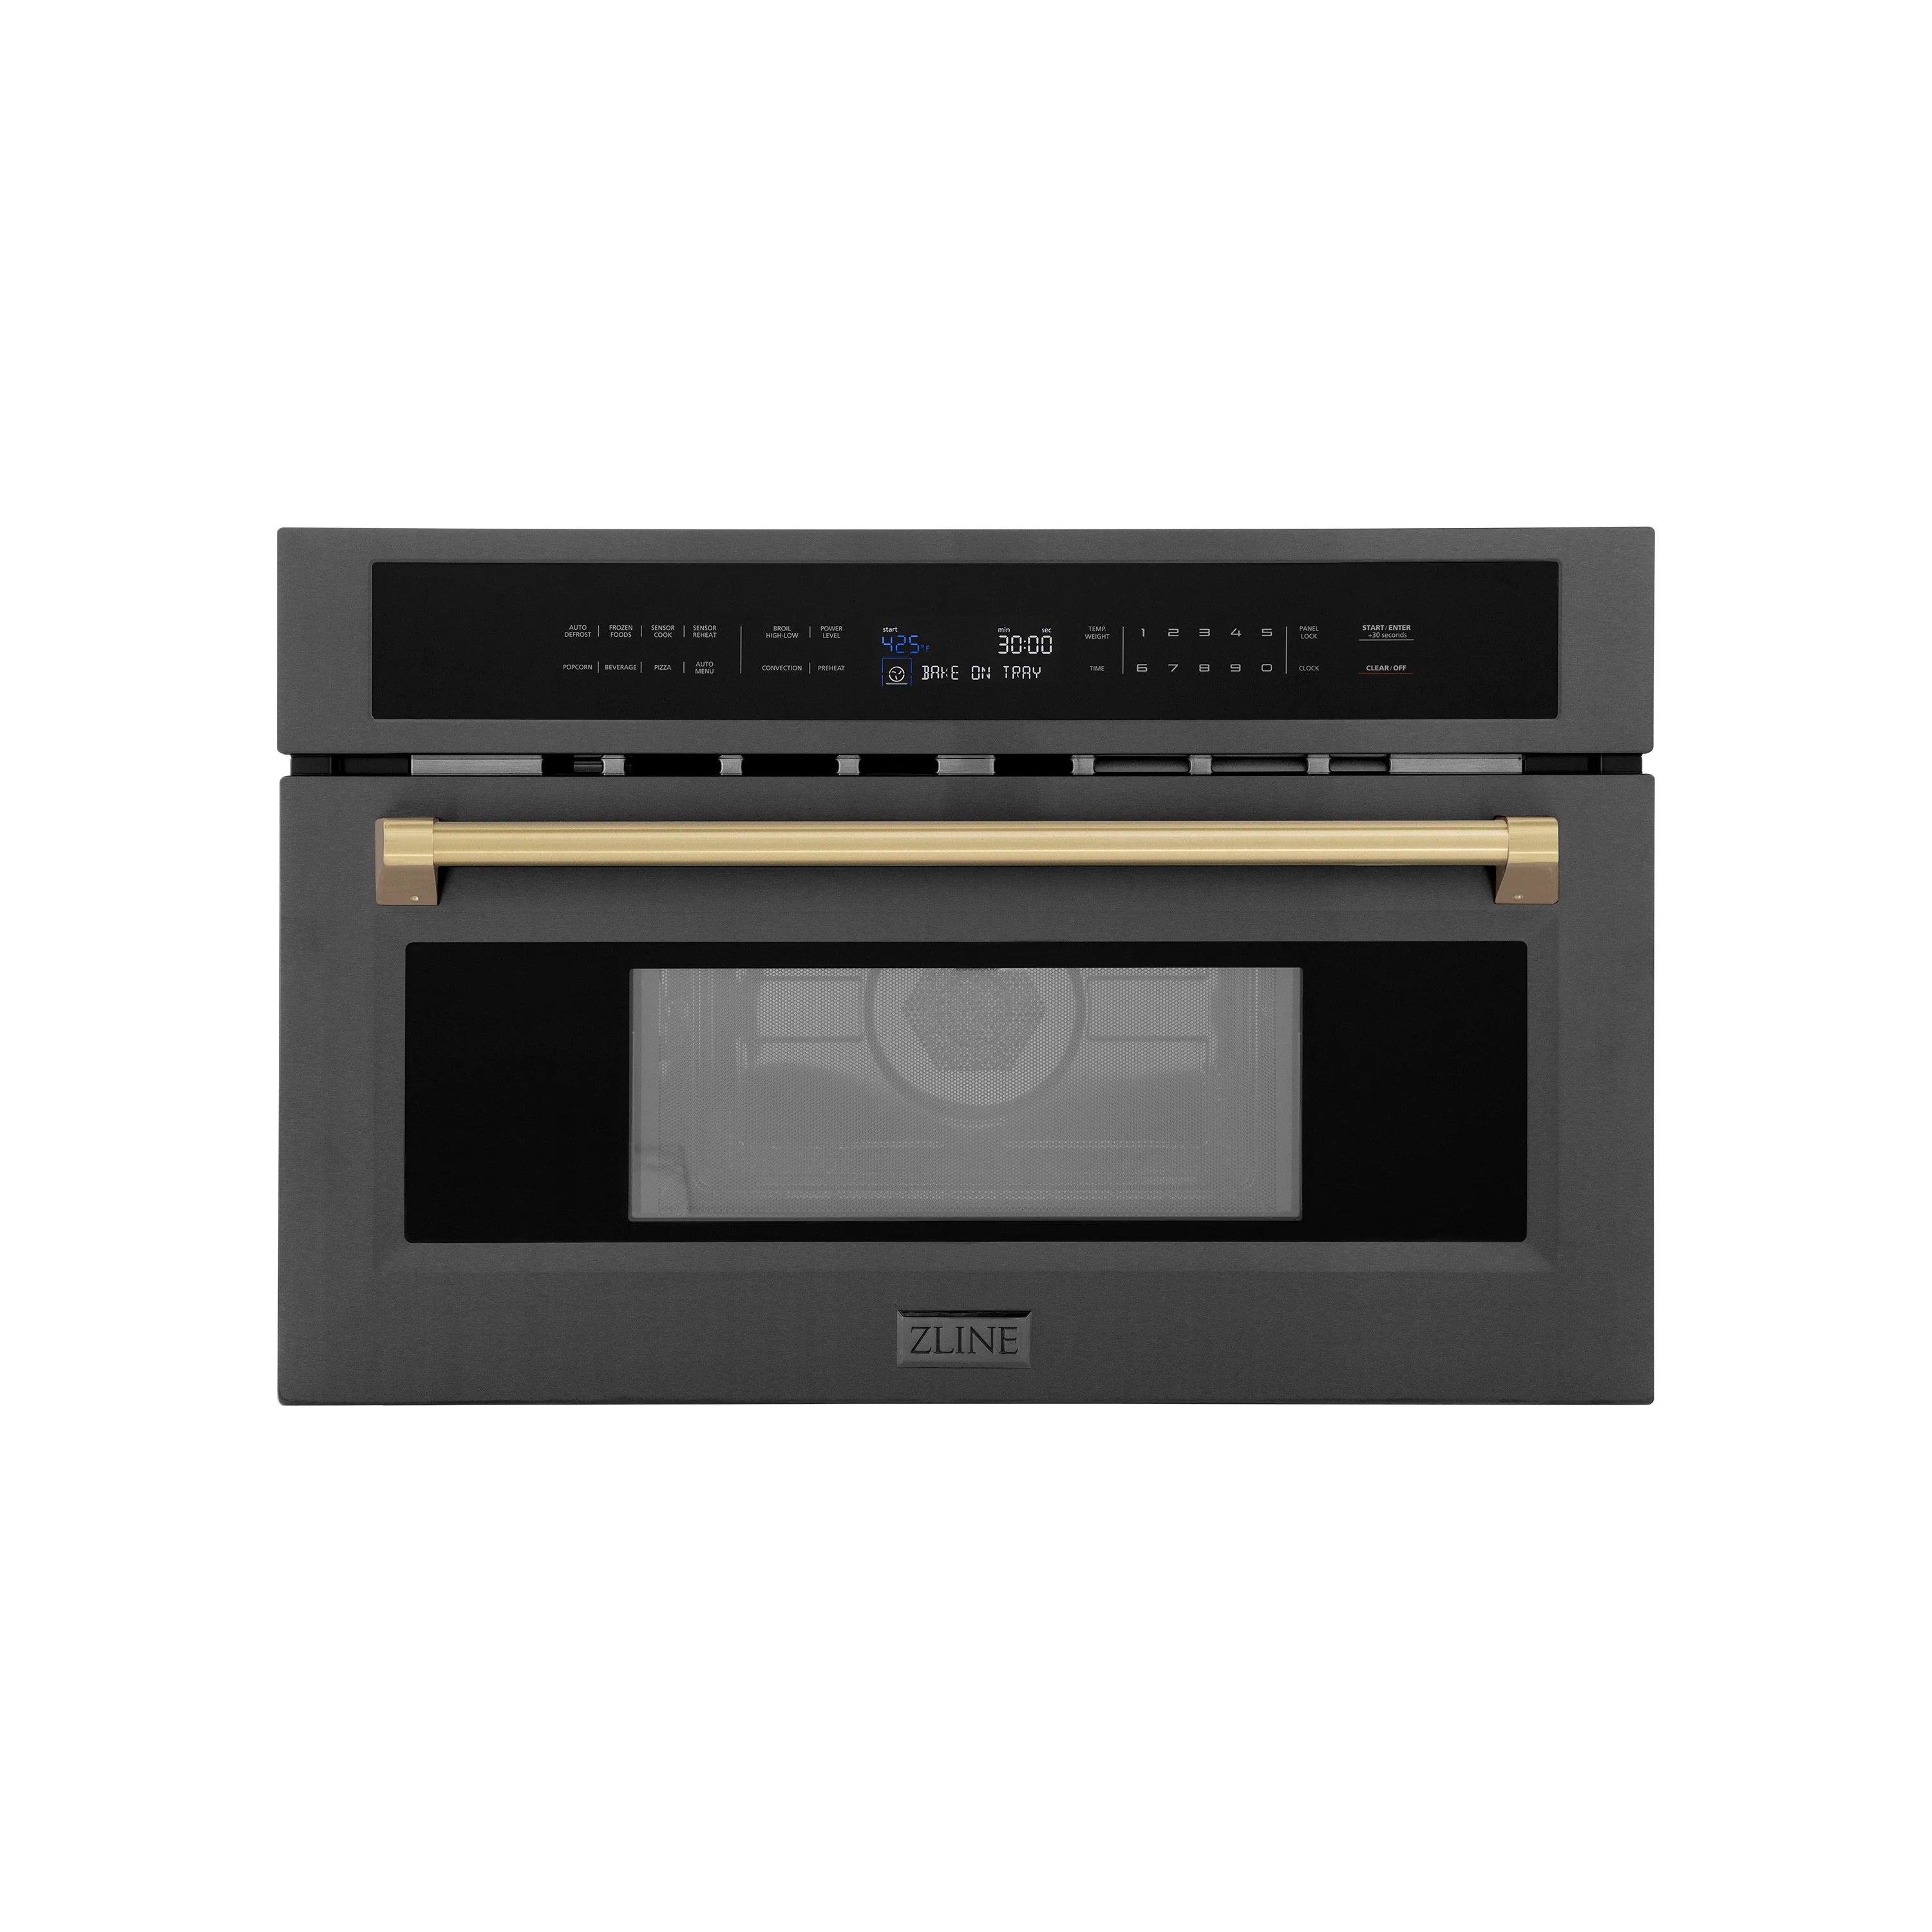 ZLINE Autograph Edition 30” 1.6 cu ft. Built-in Convection Microwave Oven in Black Stainless Steel and Champagne Bronze Accents (MWOZ-30-BS-CB)